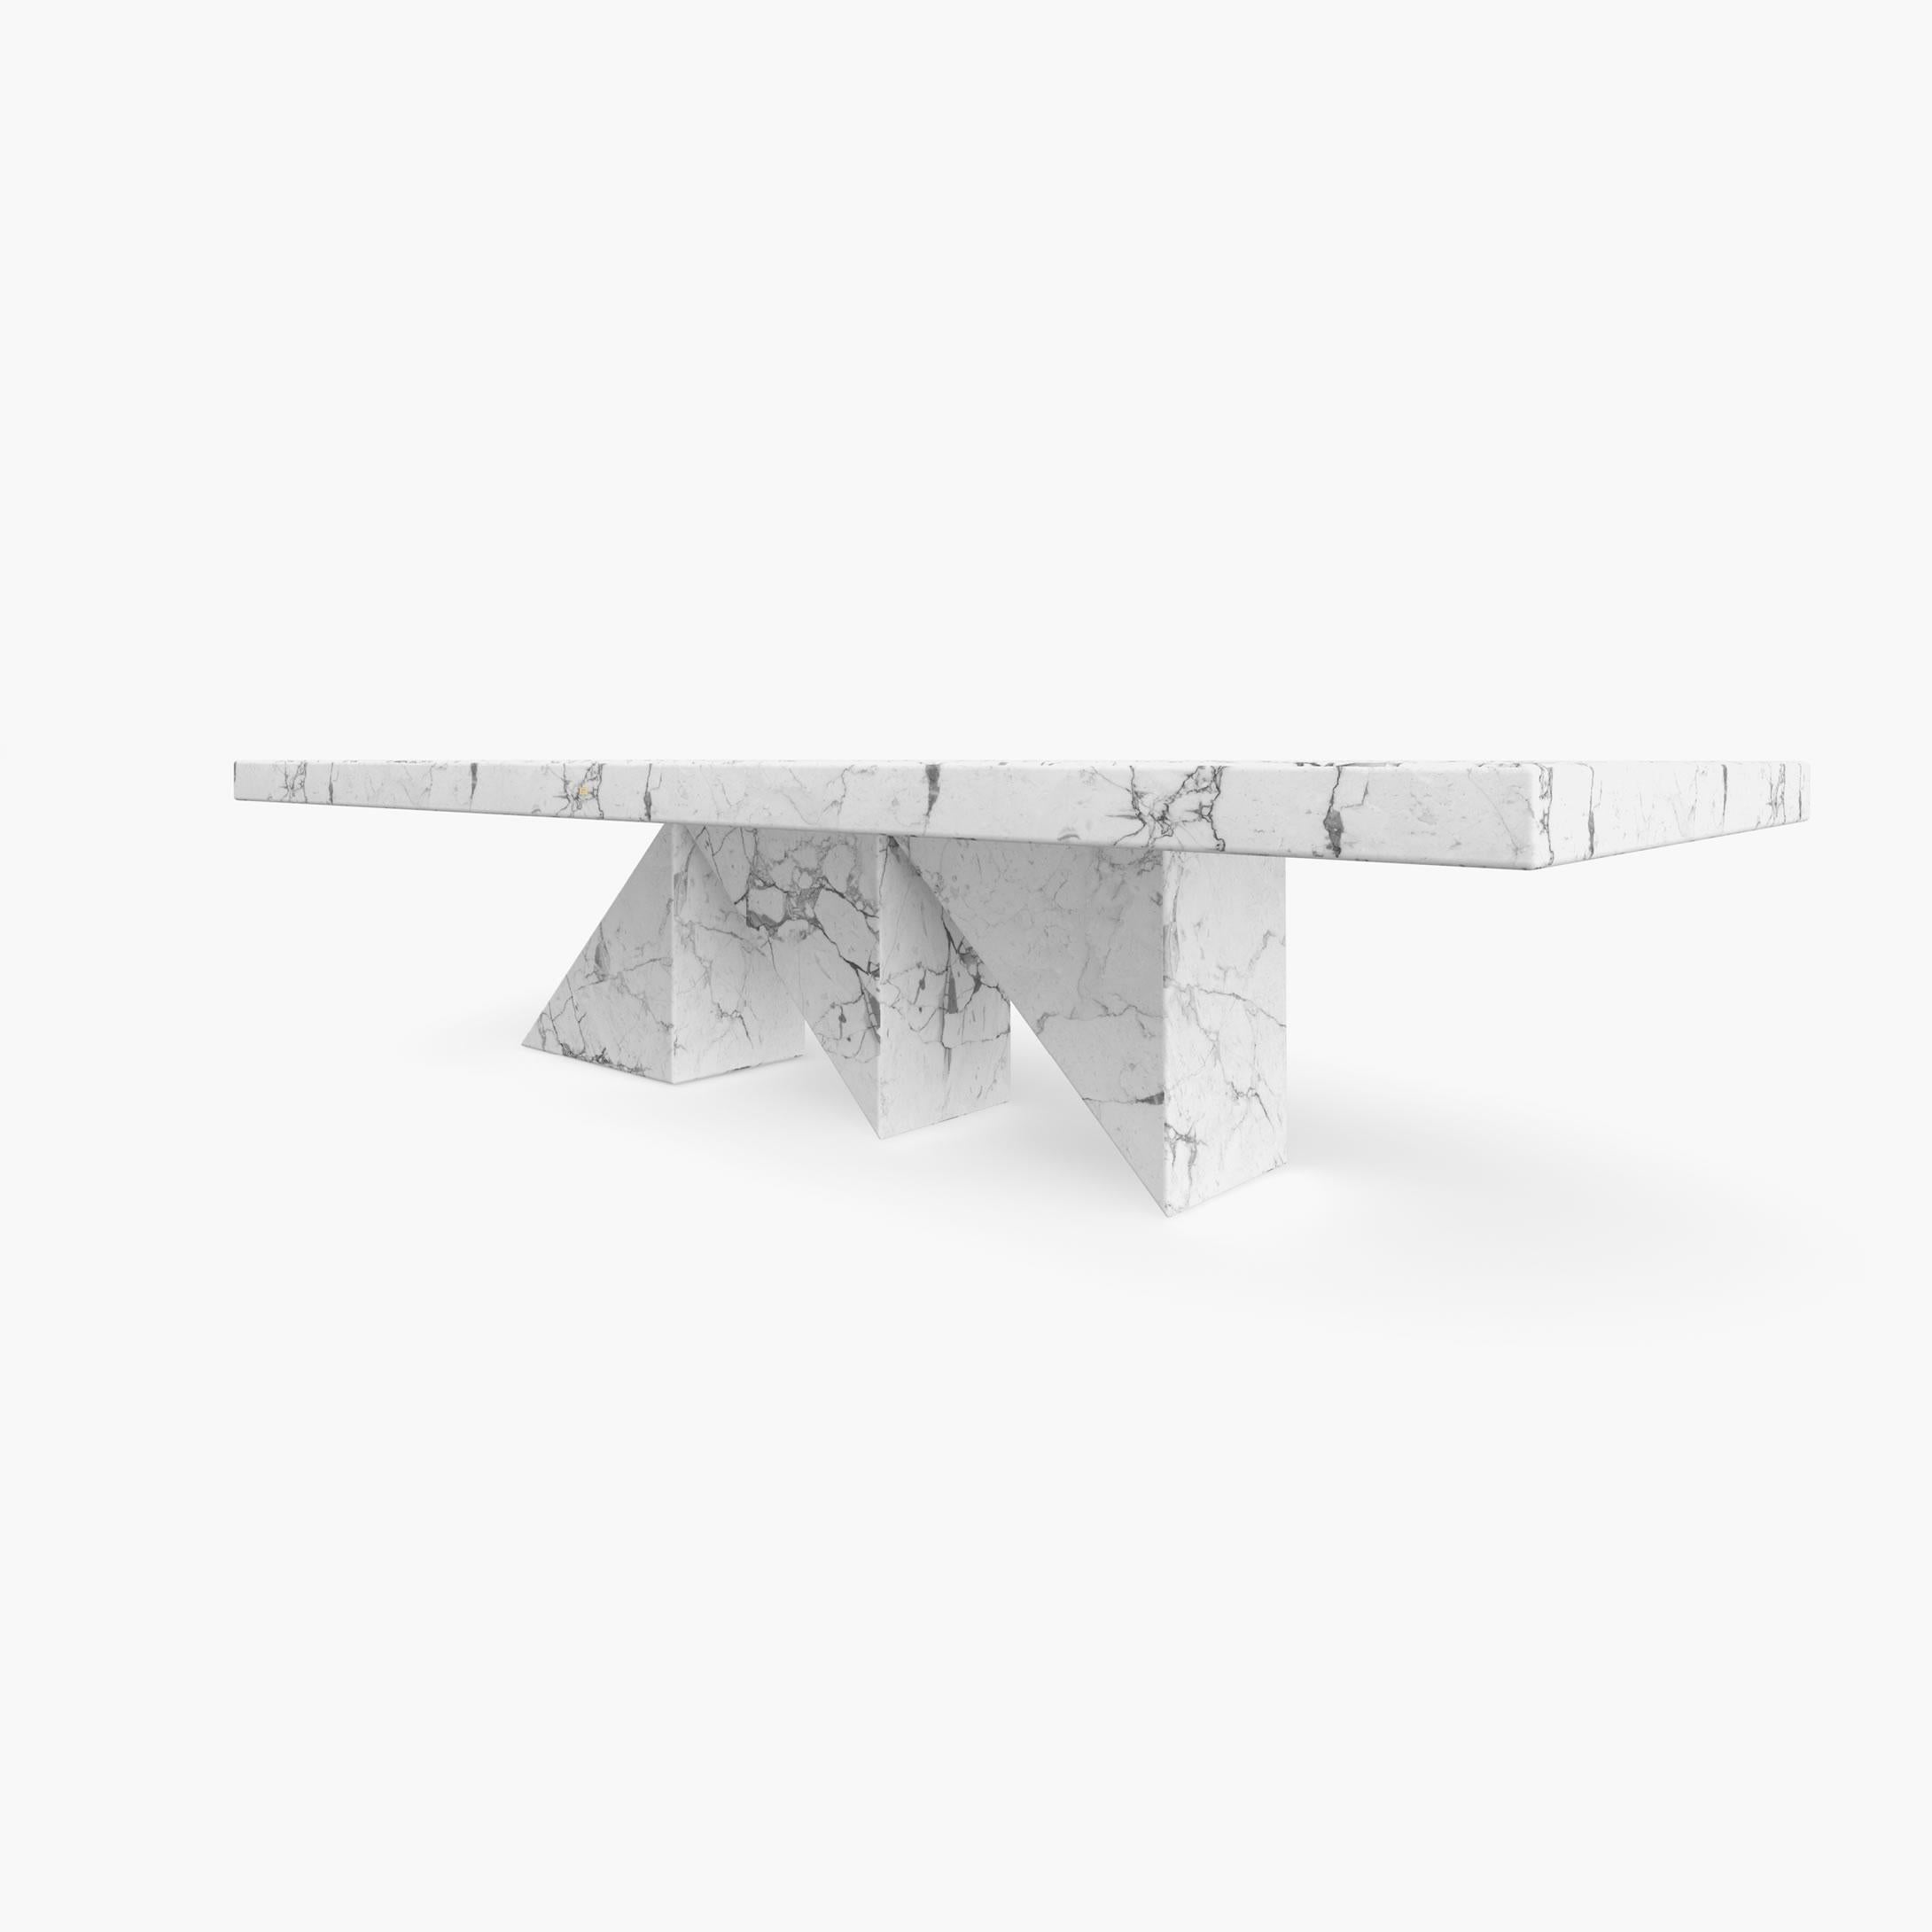 Contemporary Dining-Table White Marble 300x140x76cm Triangular Middle-Leg, Handcrafted, pc1/1 For Sale